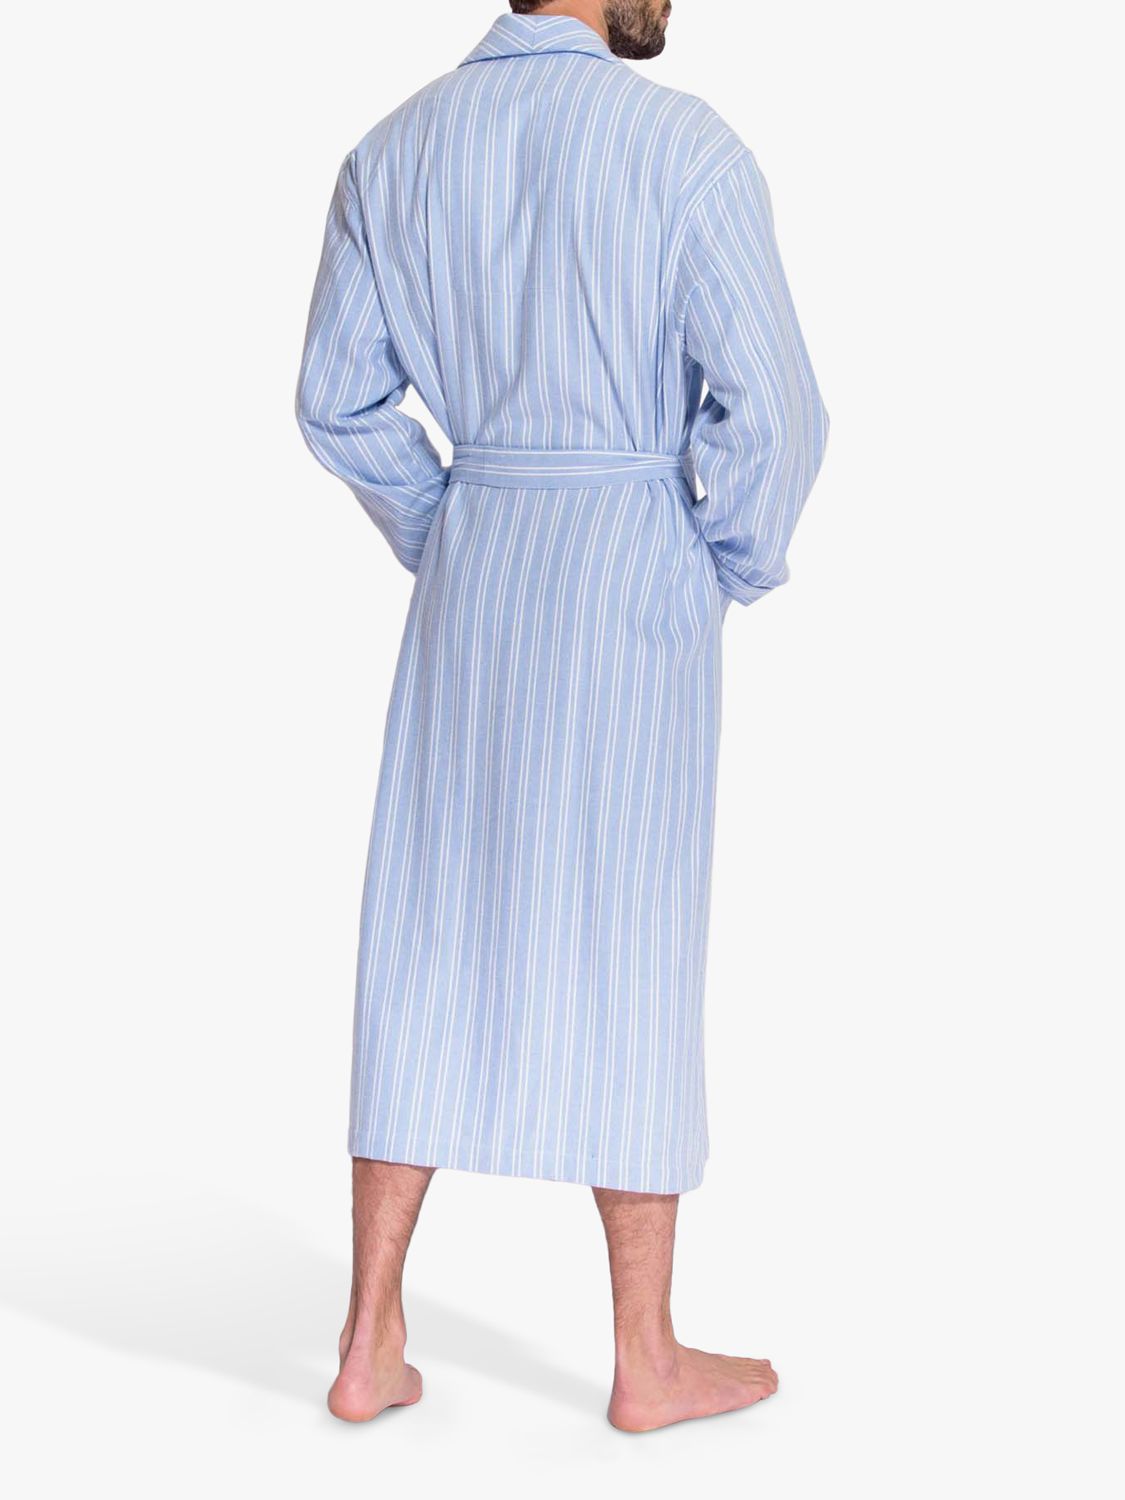 British Boxers Westwood Stripe Brushed Cotton Dressing Gown, Blue, S